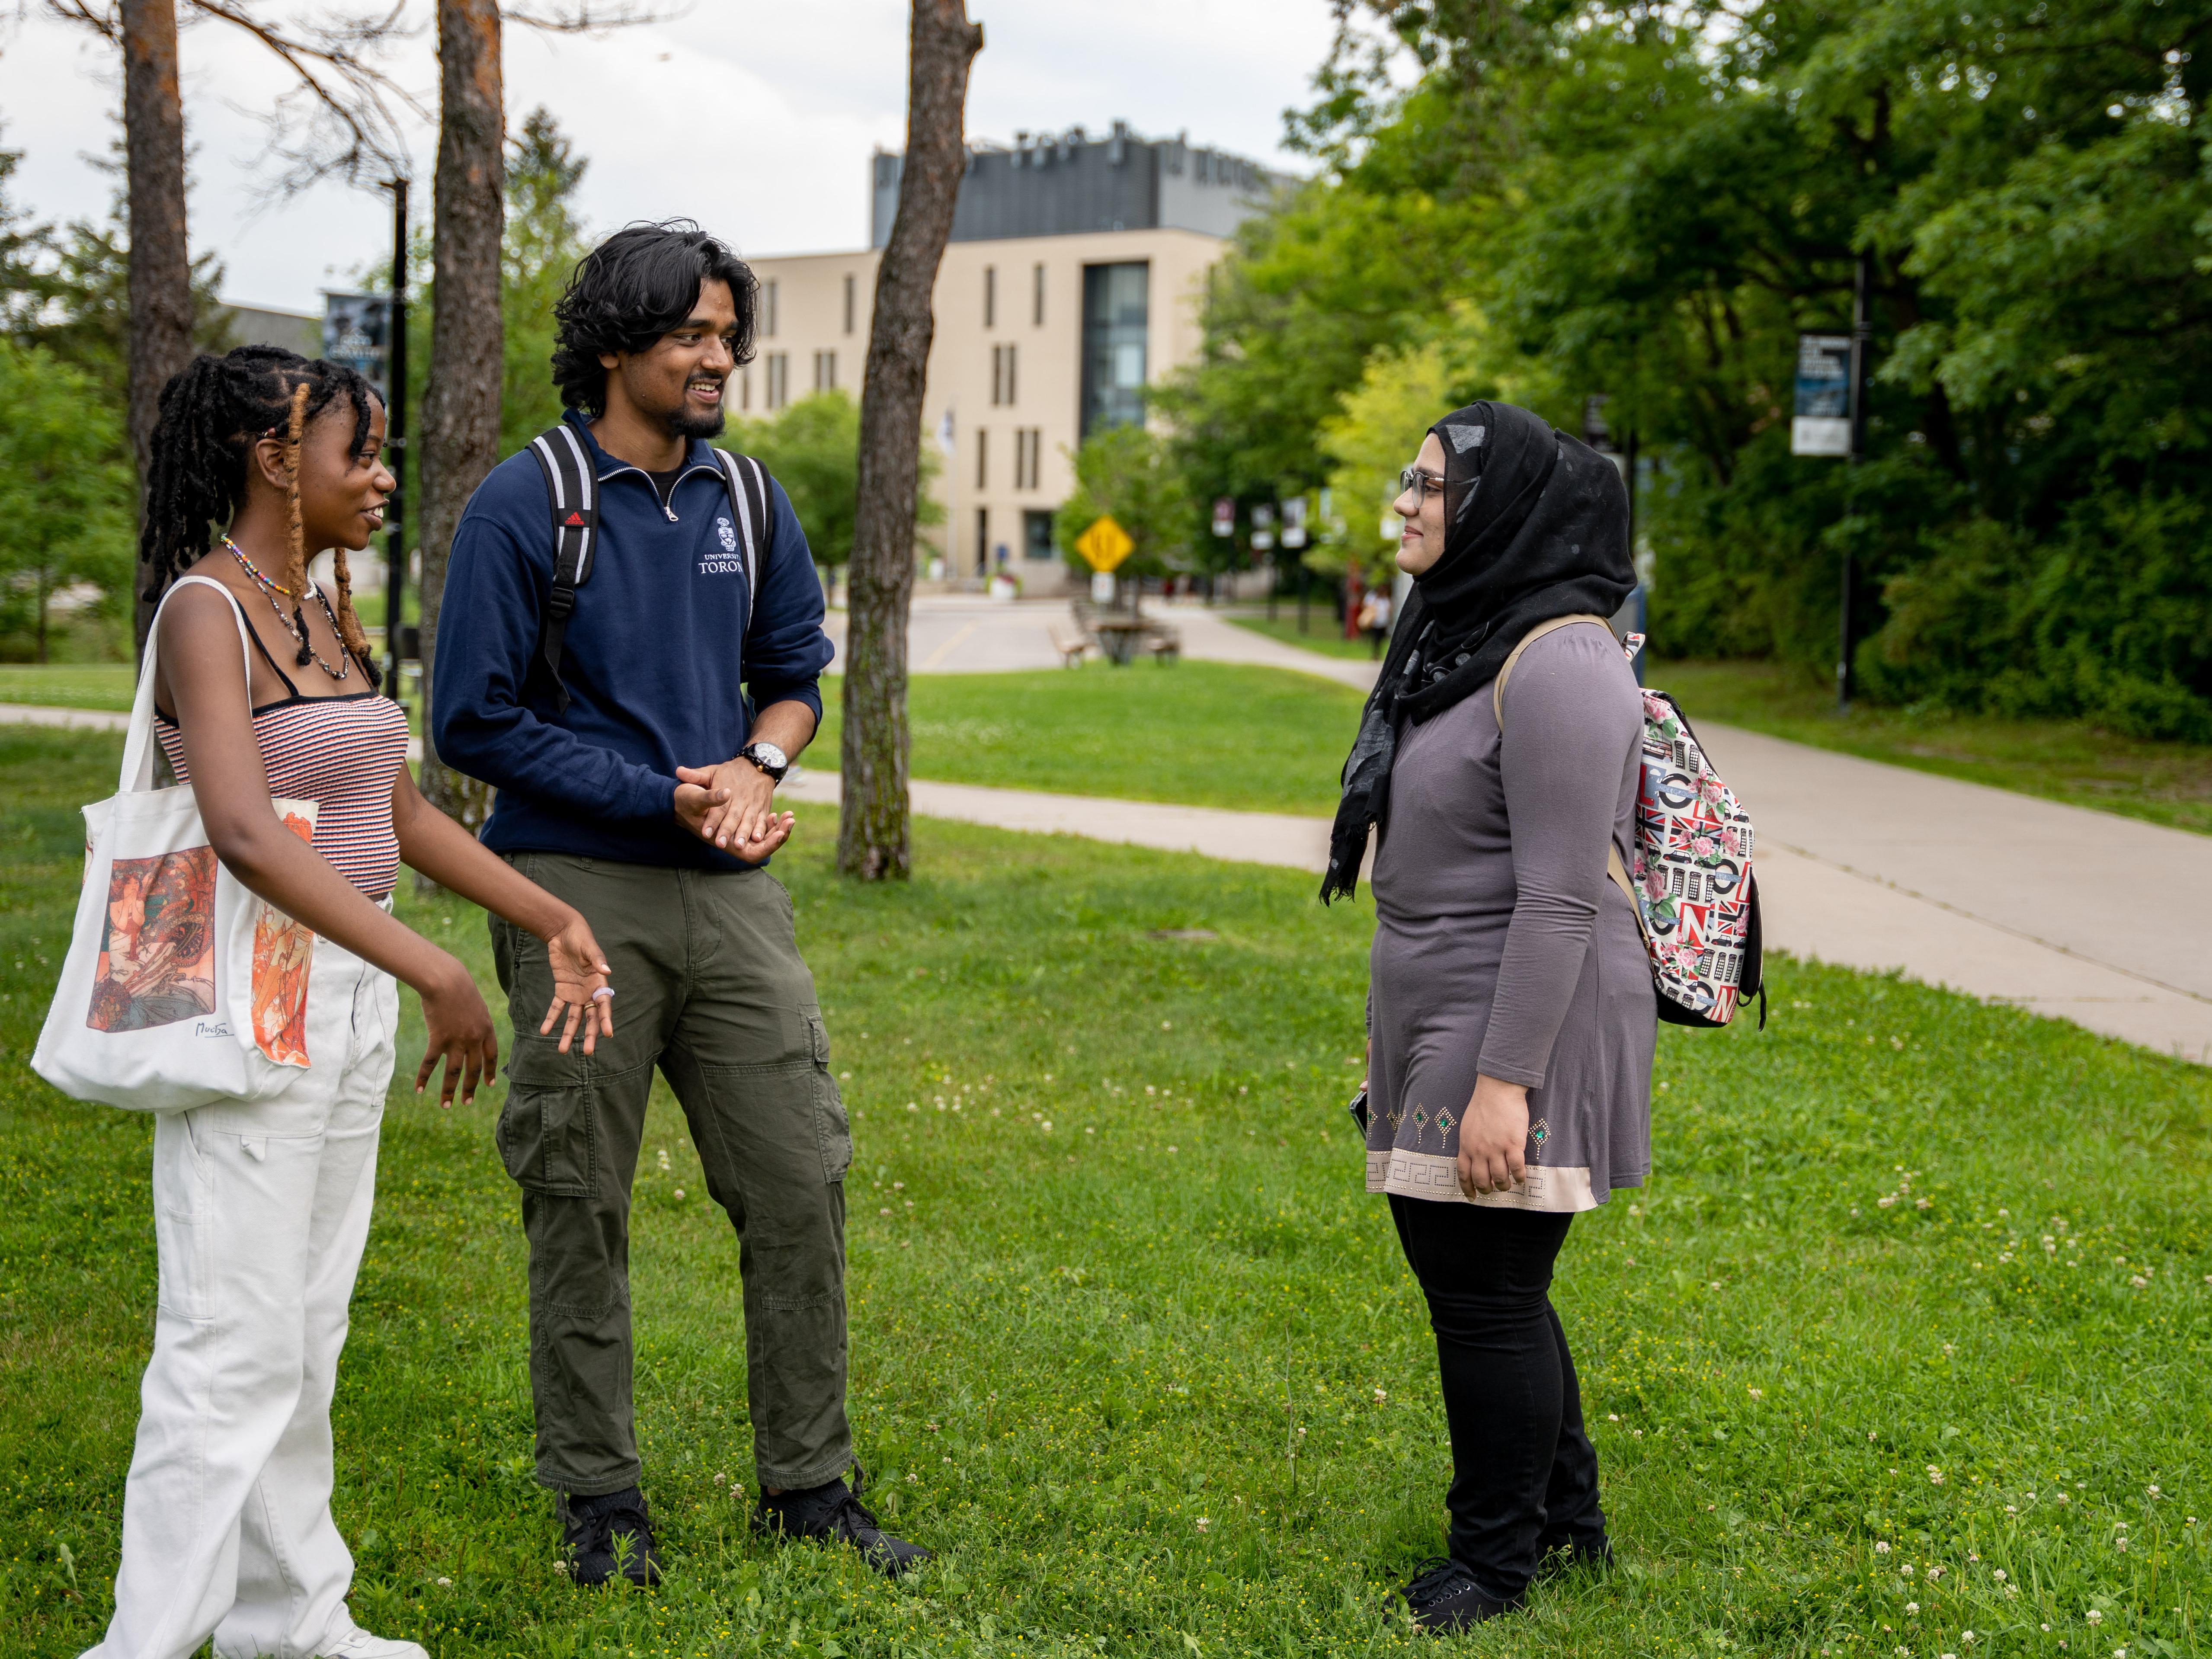 Students standing outside in discussion, with a building in the background